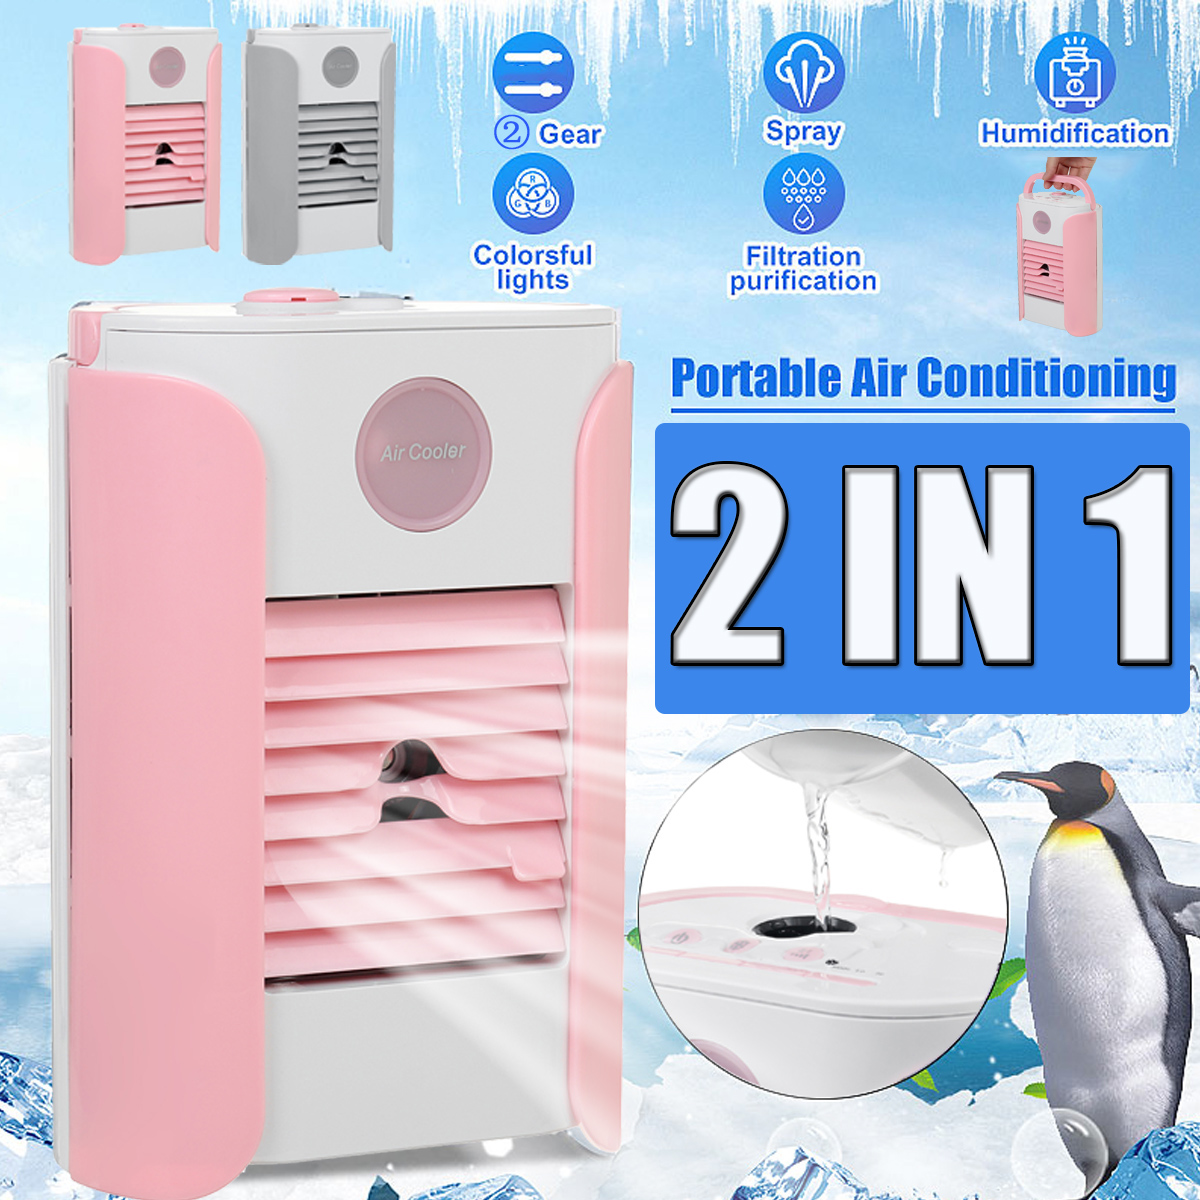 Multifunction-Humidifier-Portable-Air-Cooler-Cool-Conditioner-Conditioning-Fan-1715755-1